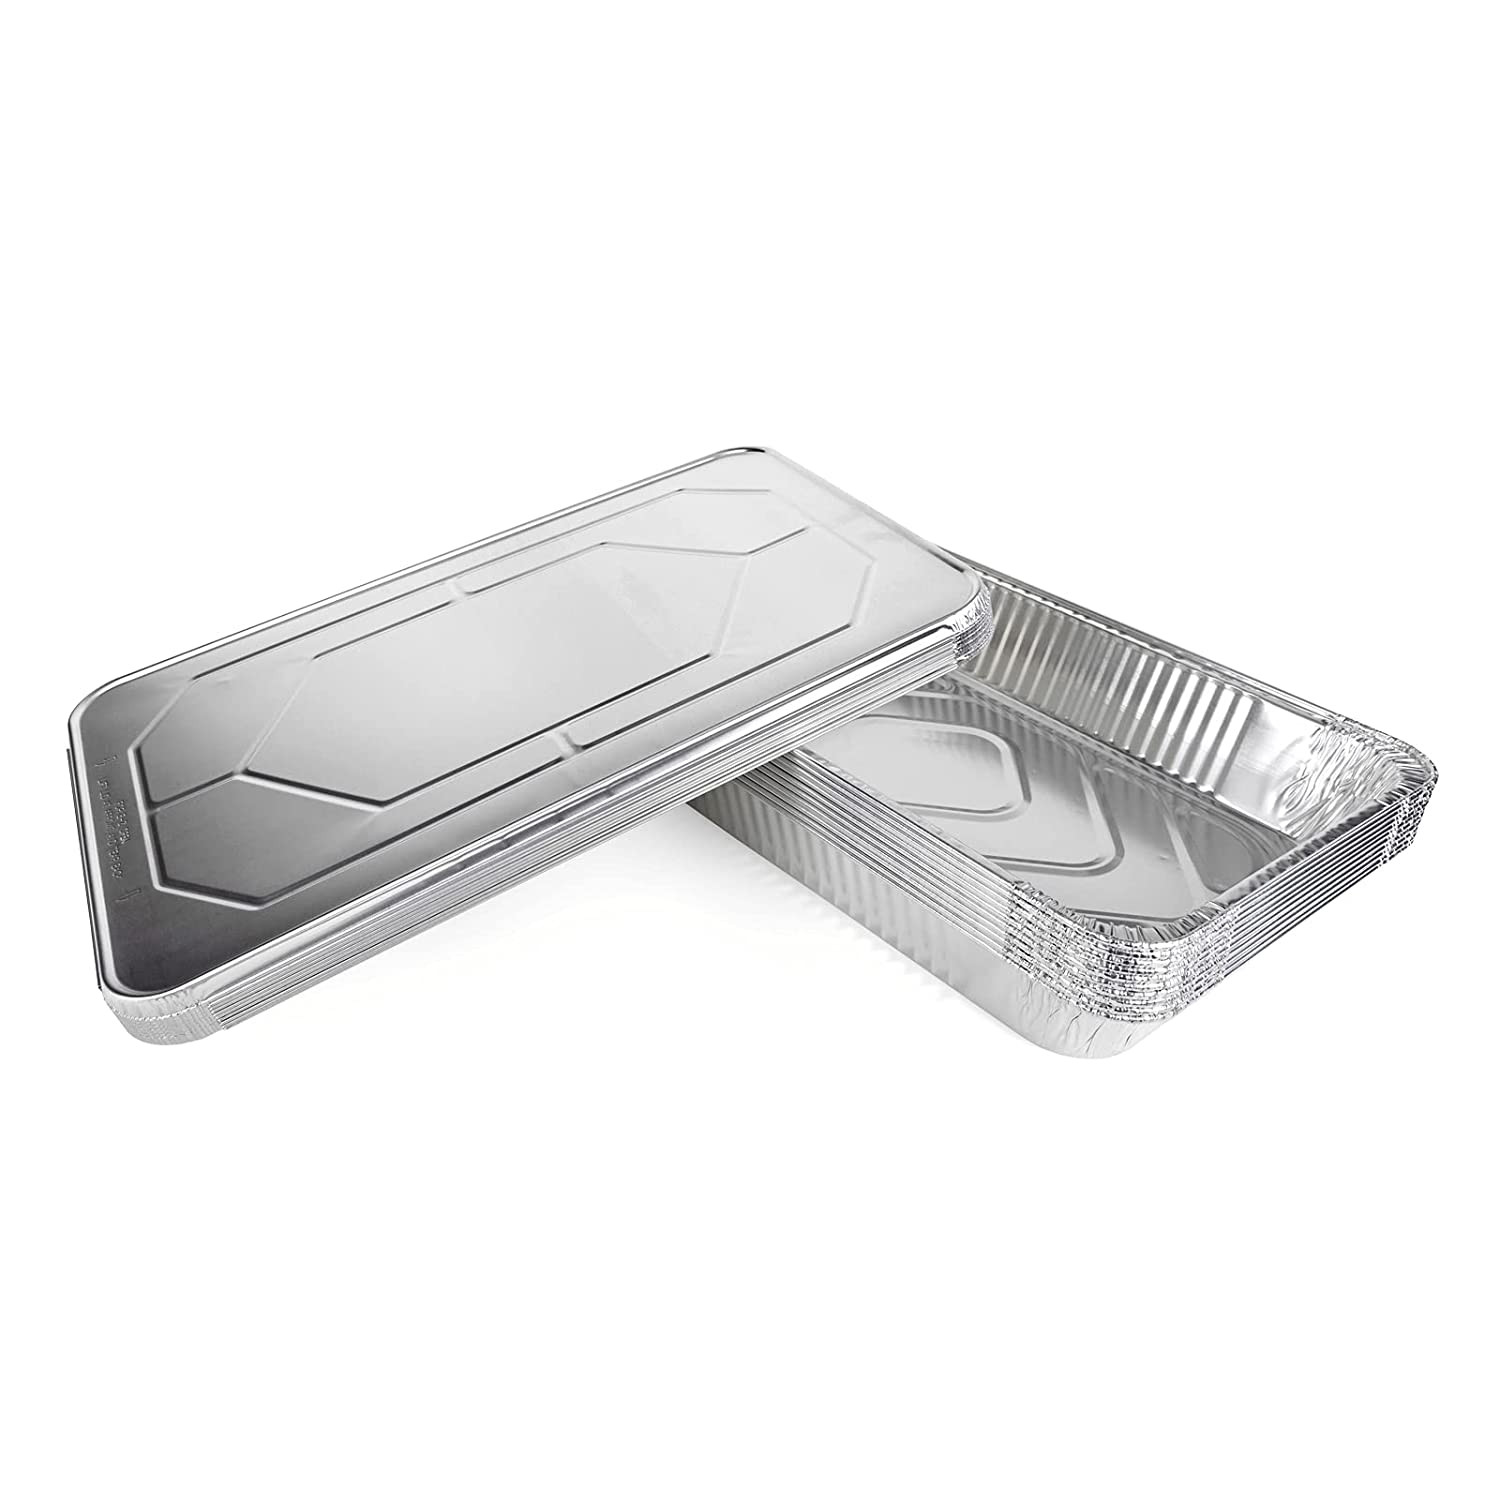 21 x 13 x 1.5 Full Size Aluminum Steam Table Pans, Shallow buy in stock  in U.S. in IDL Packaging